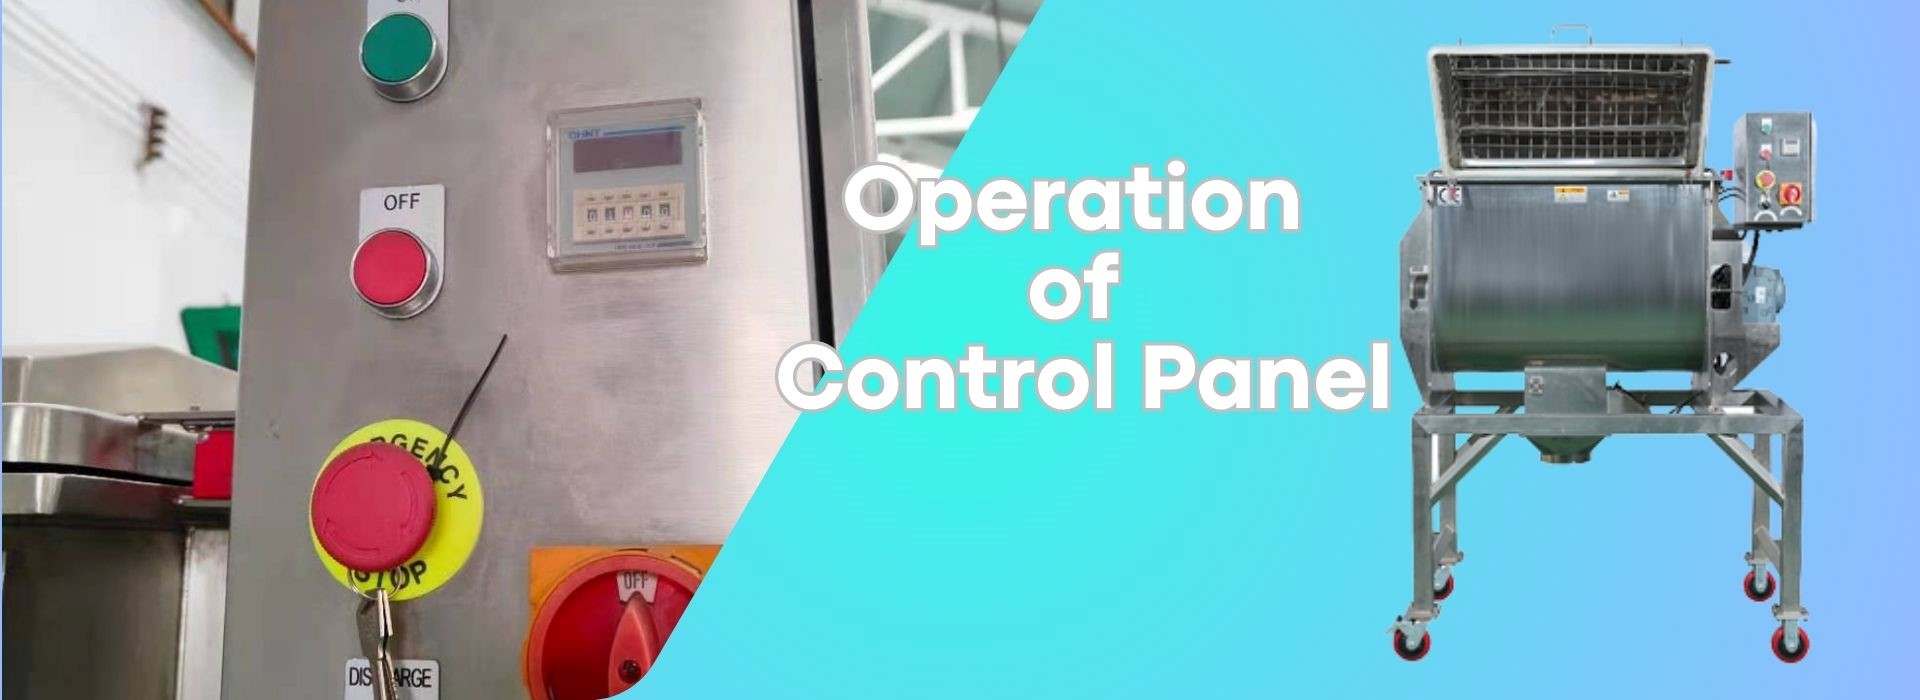 How should we operate the Control Panel1